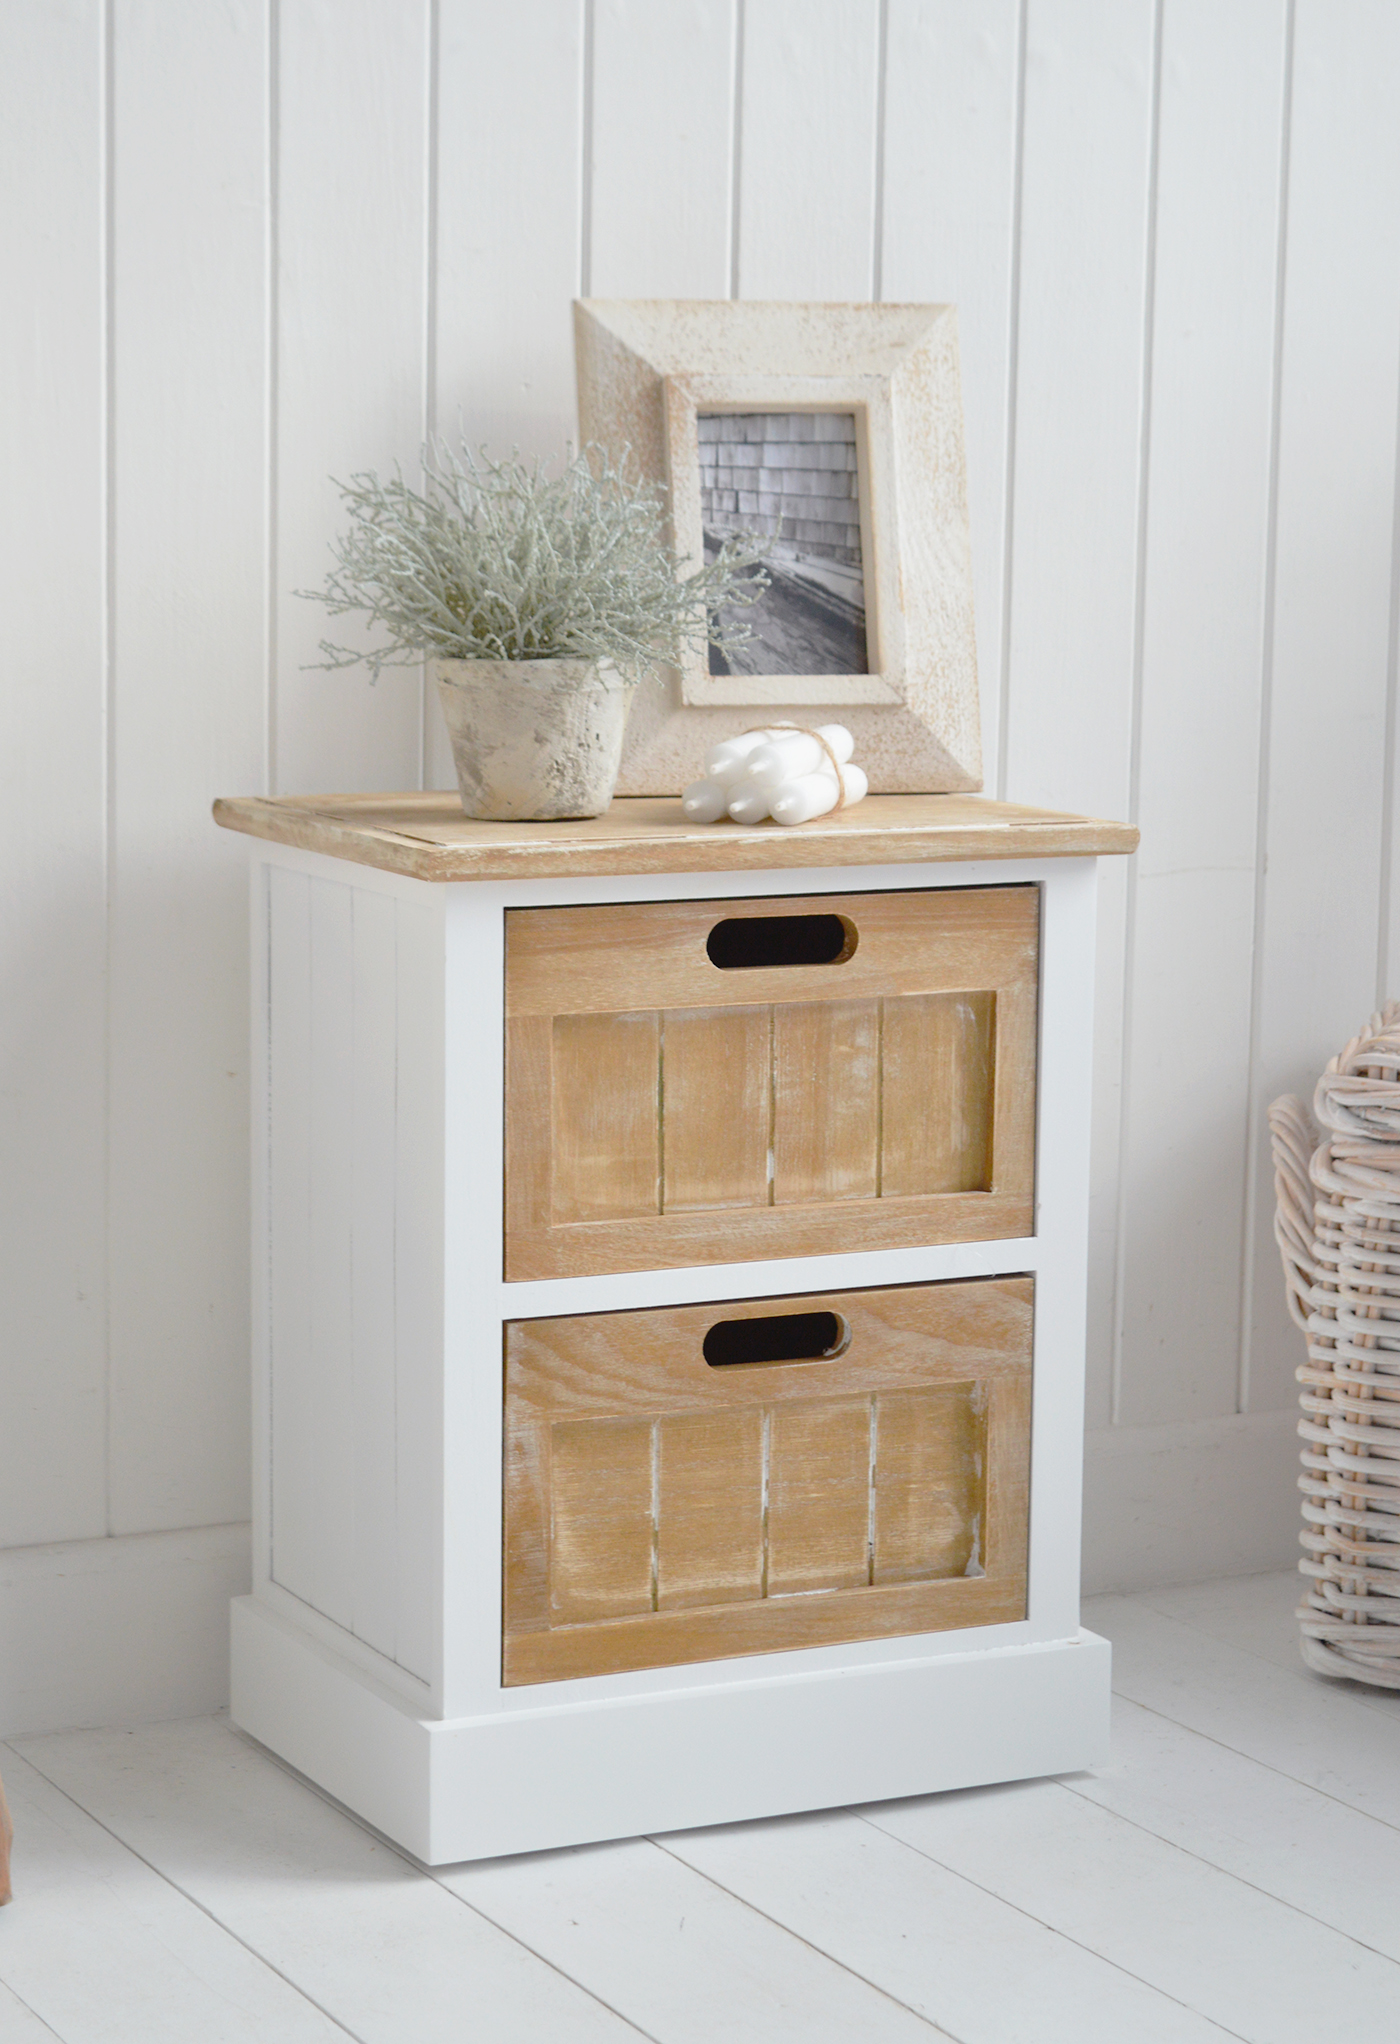 Maine white bedside cabinet for white bedrooms in counrty and coastal New England interiors